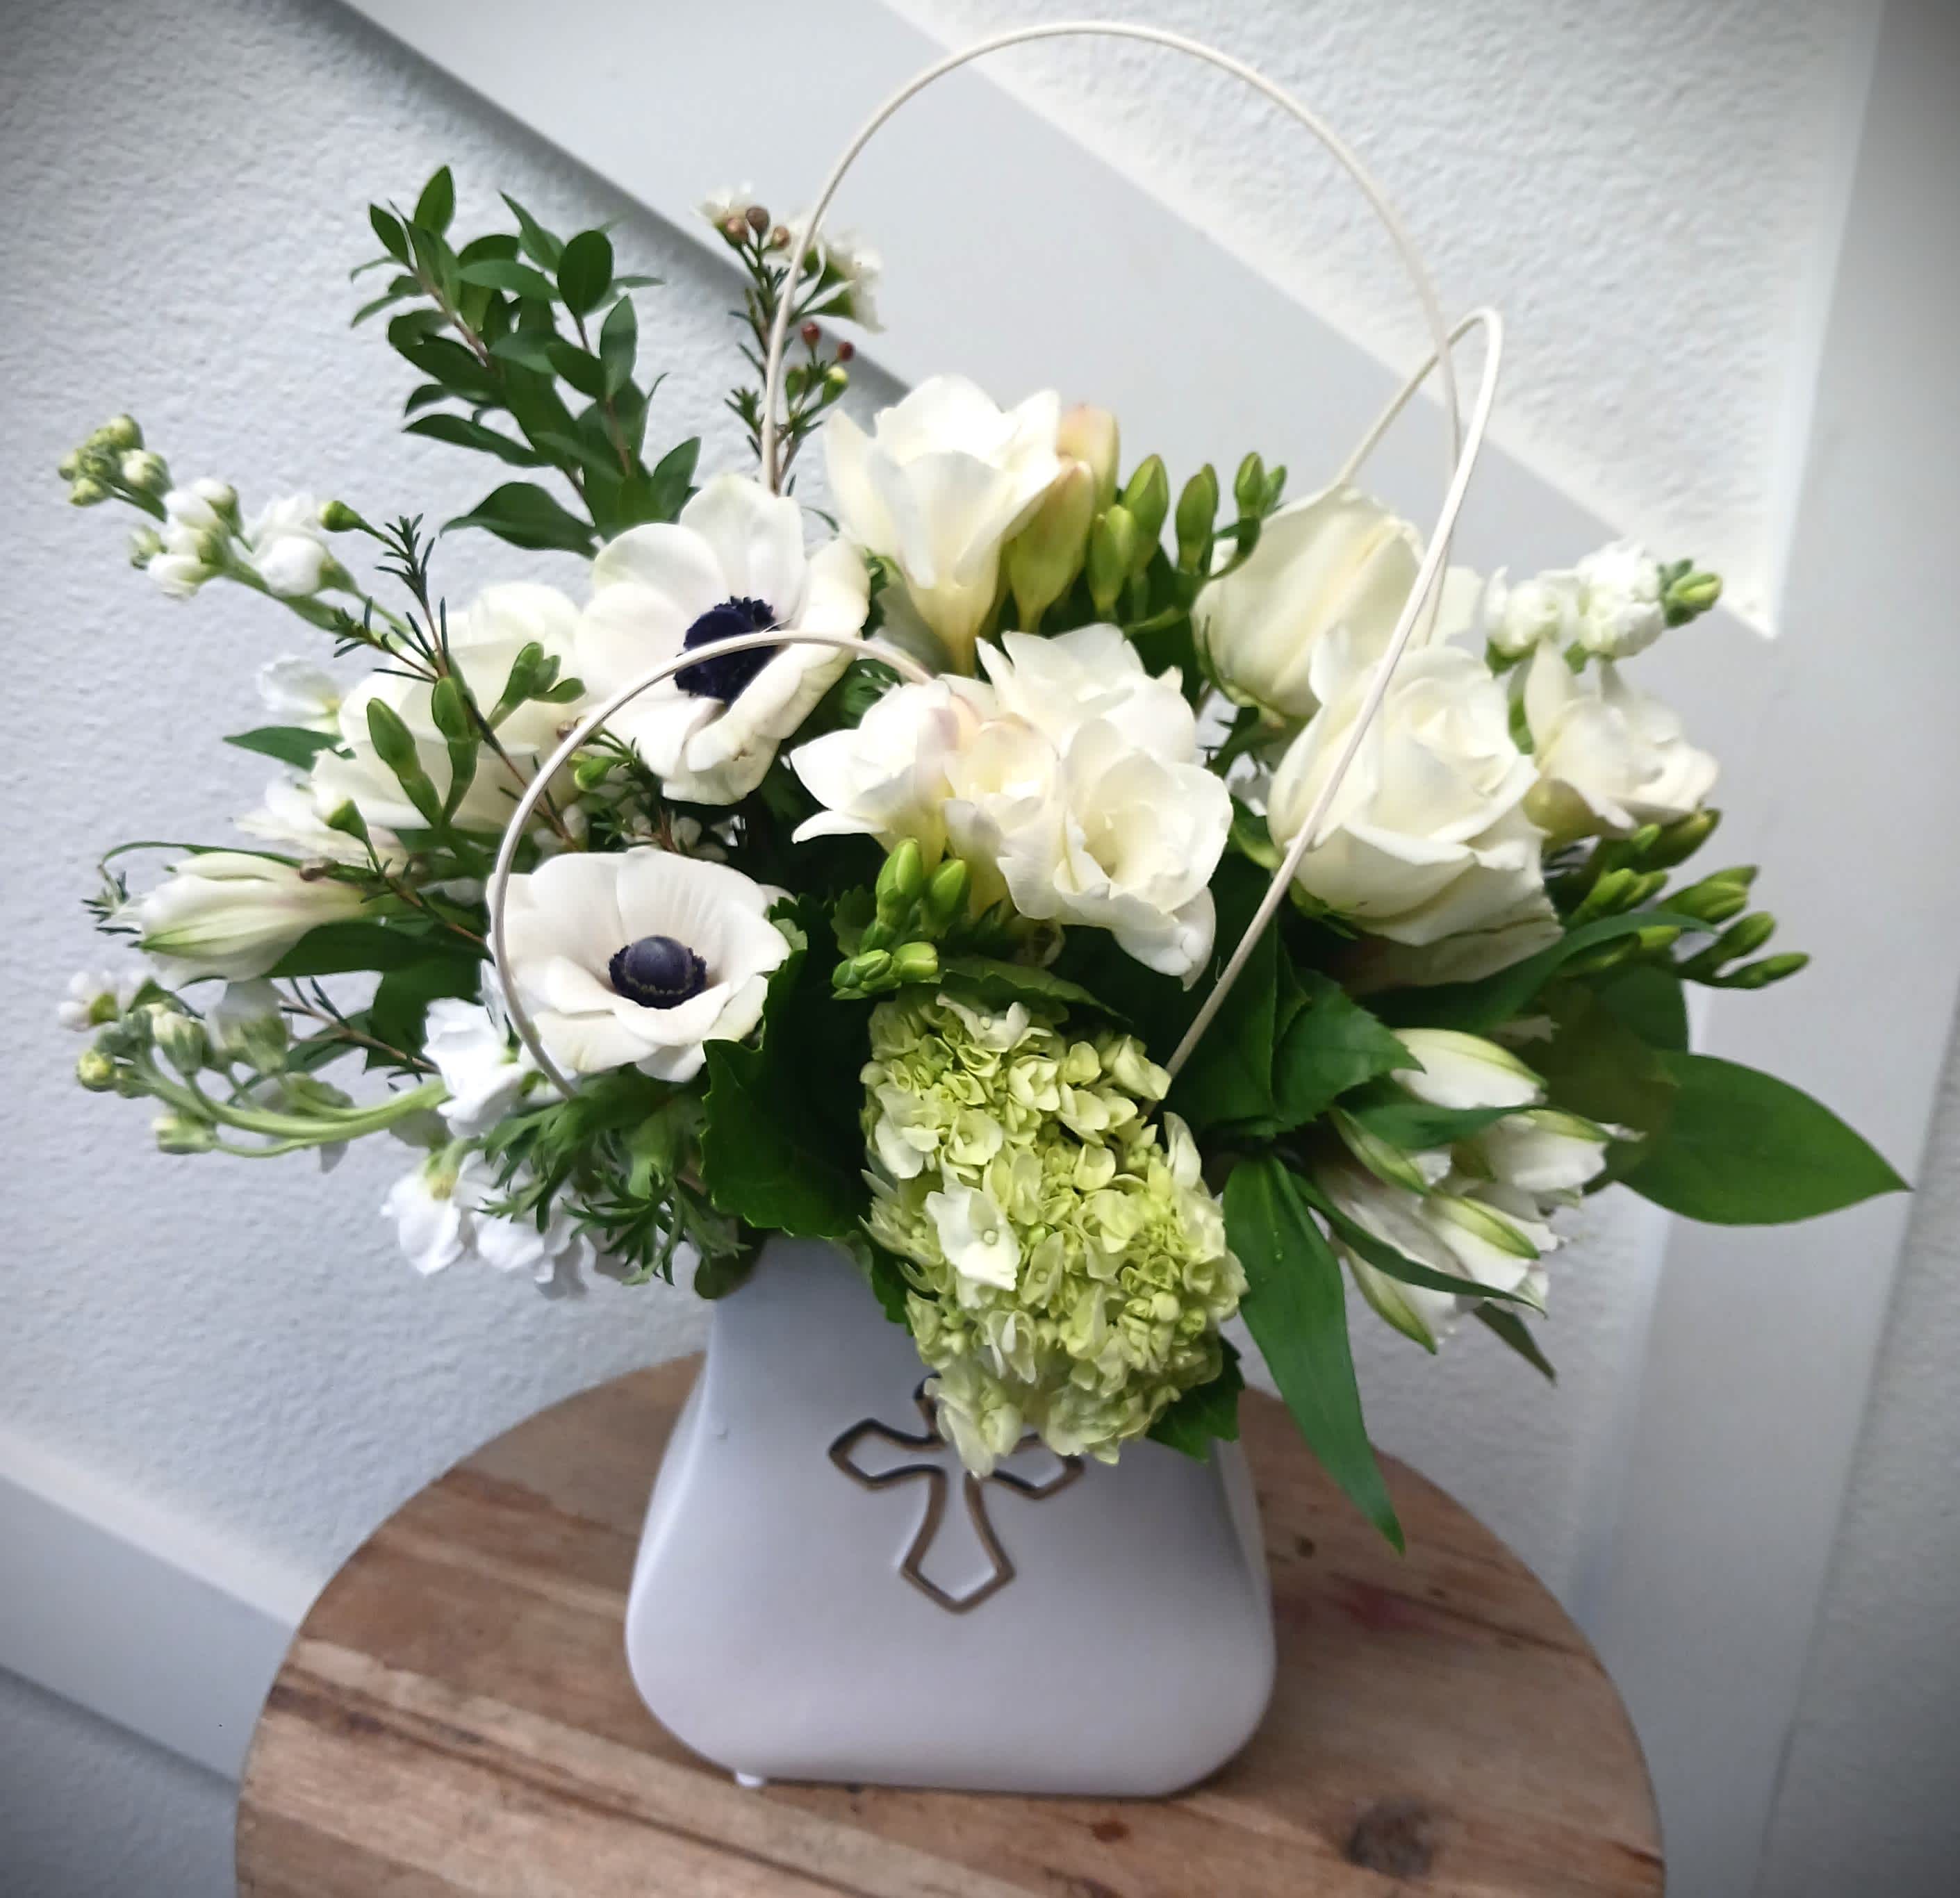 Graceful Memories - For the times when words cannot express how you feel, let the flowers speak for you. This premium all white spring mix features seasonal flowers such as freesia &amp; anemones designed in a keepsake ceramic cross vase. Our designers will always use the freshest of items when creating this seasonal arrangement. 